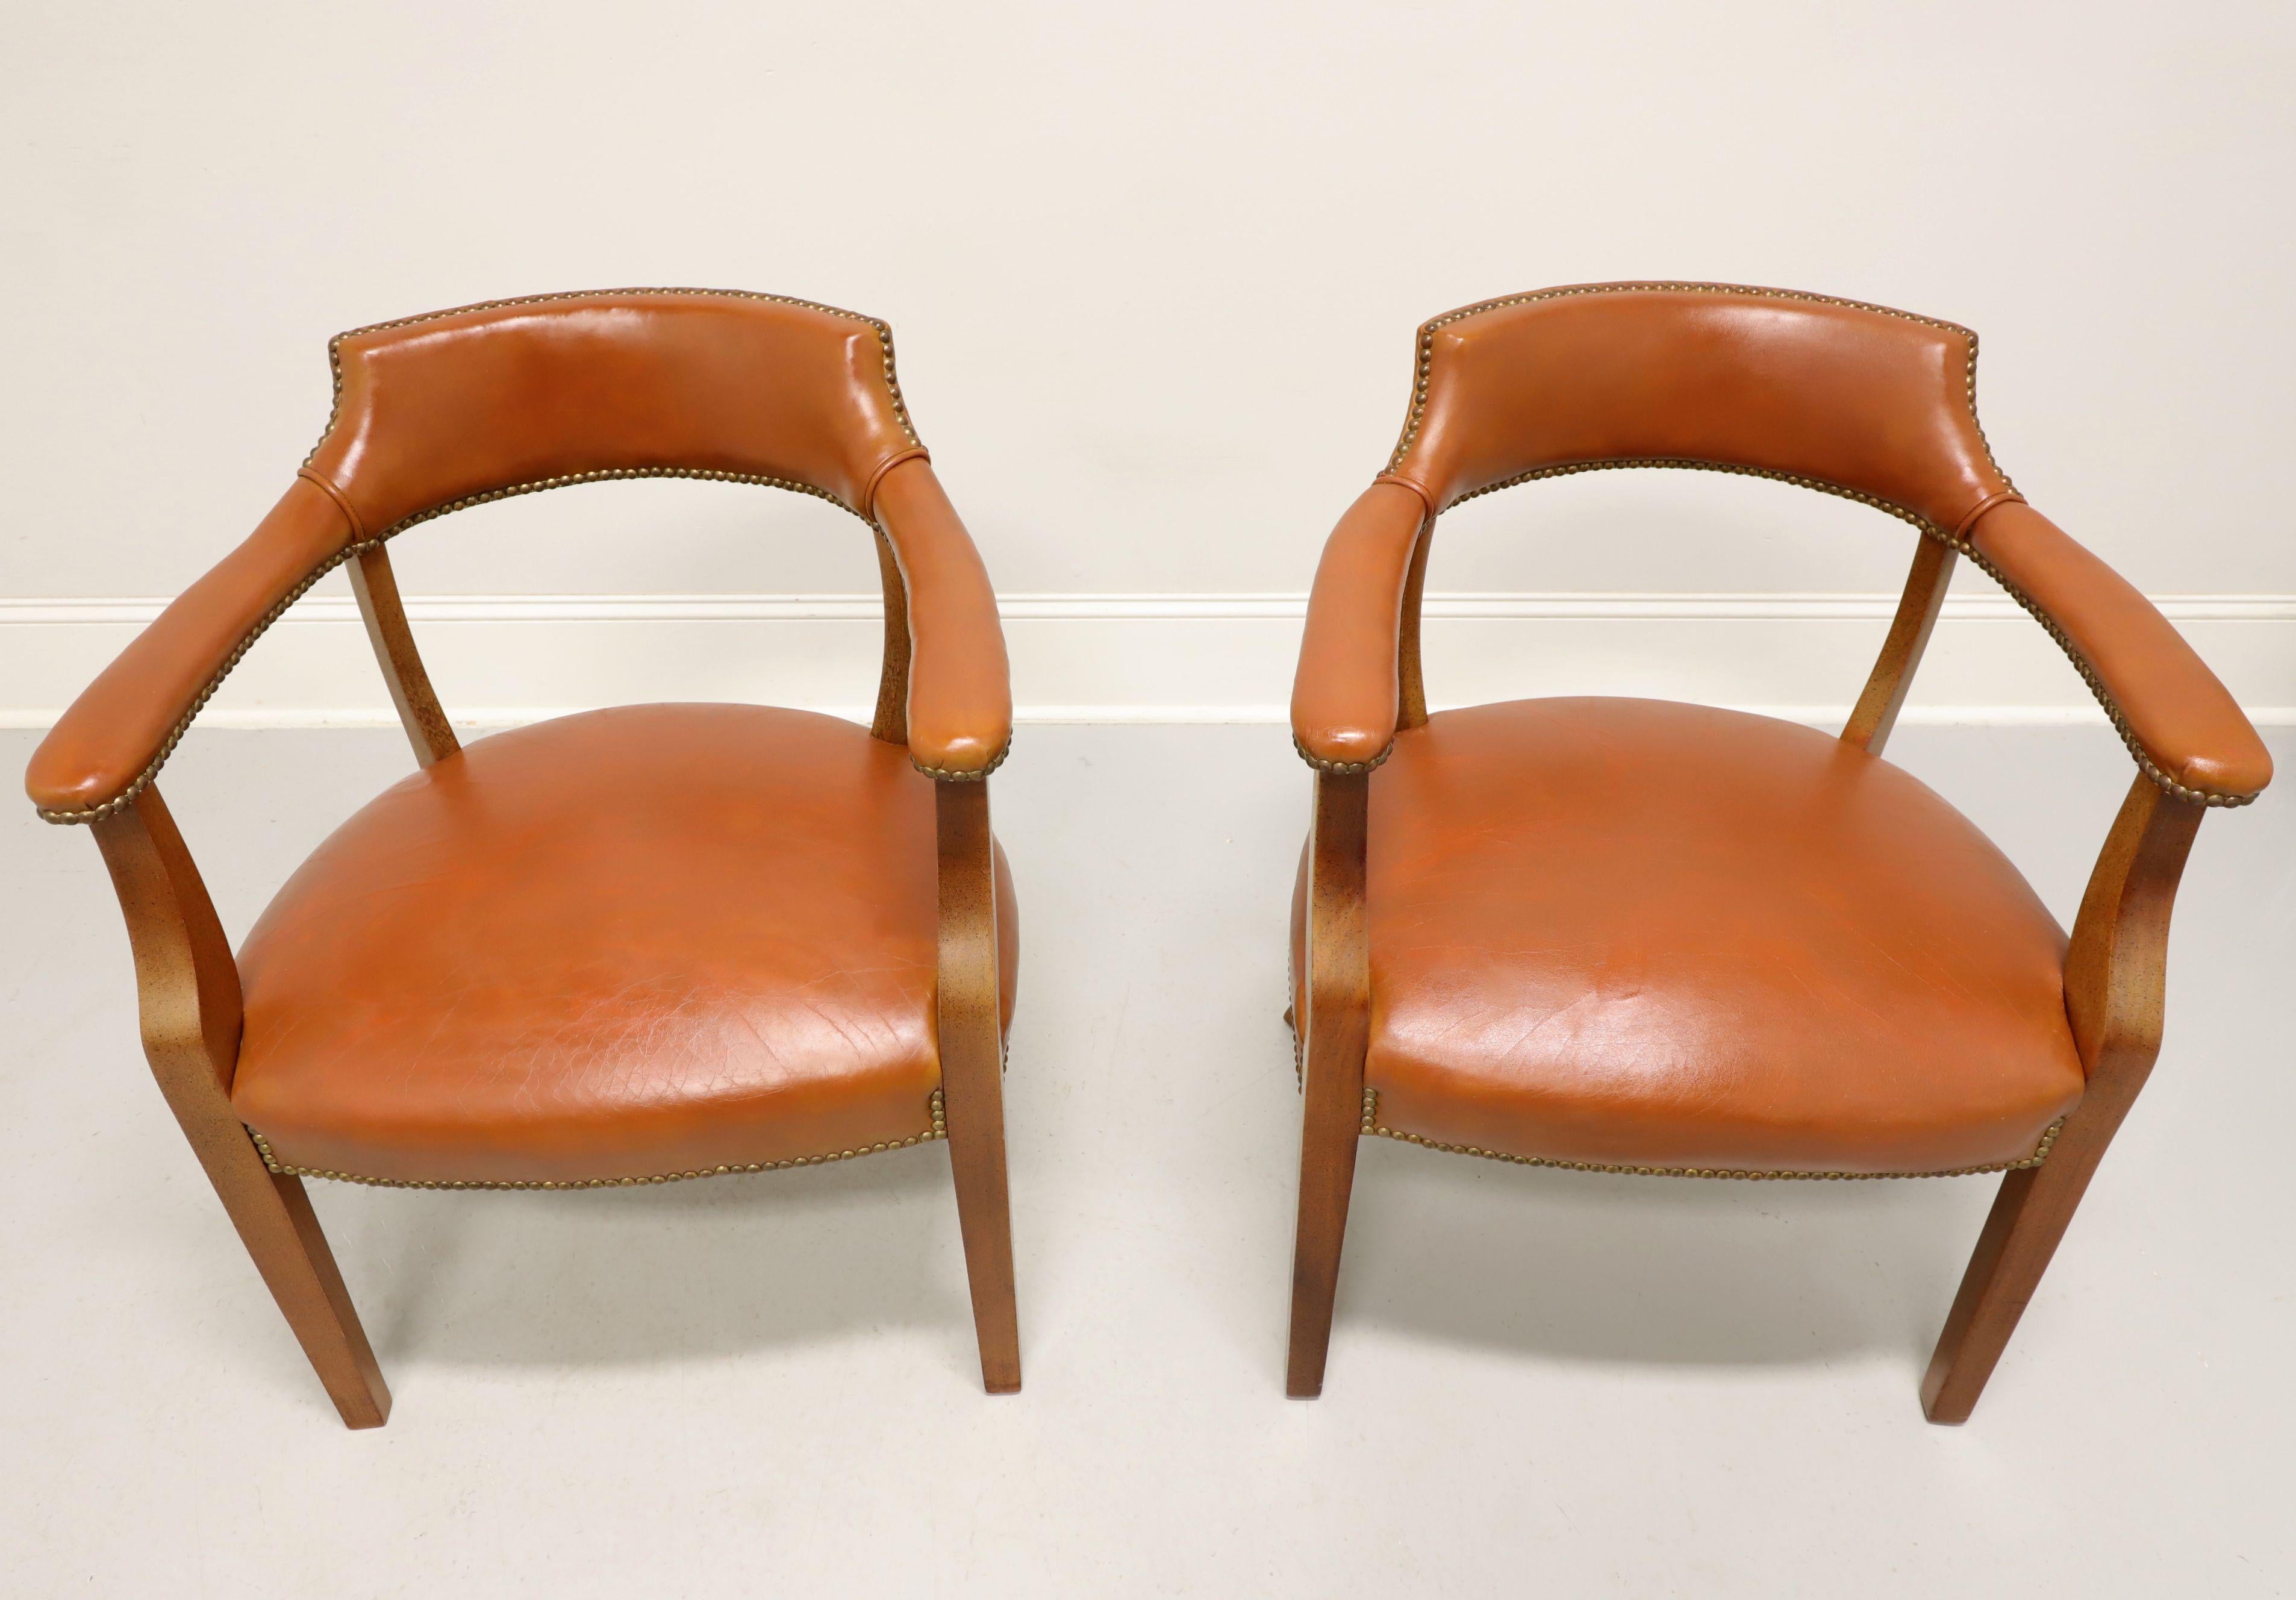 A pair of Traditional style game chairs by Classic Leather. Walnut frame with a distressed finish, light brown color leather upholstered, barrel back, brass nailhead trim, flared rear legs and straight front legs. Made in Conover, North Carolina,